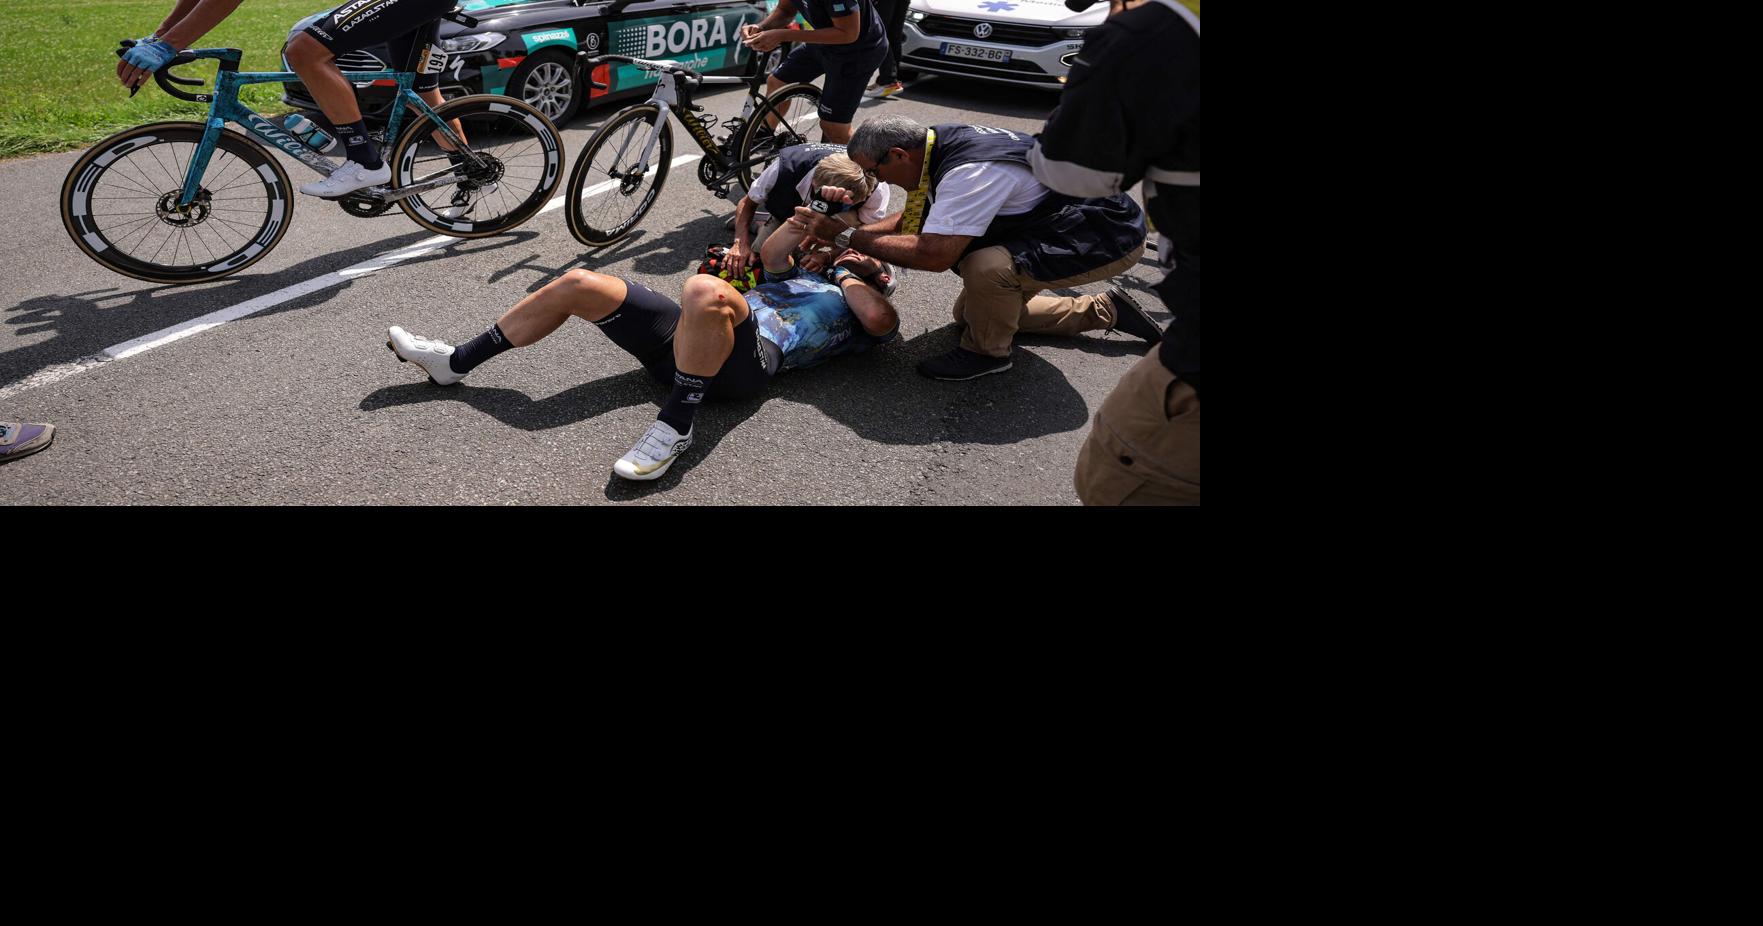 Mark Cavendish’s Tour de France record attempt ends with crash in stage